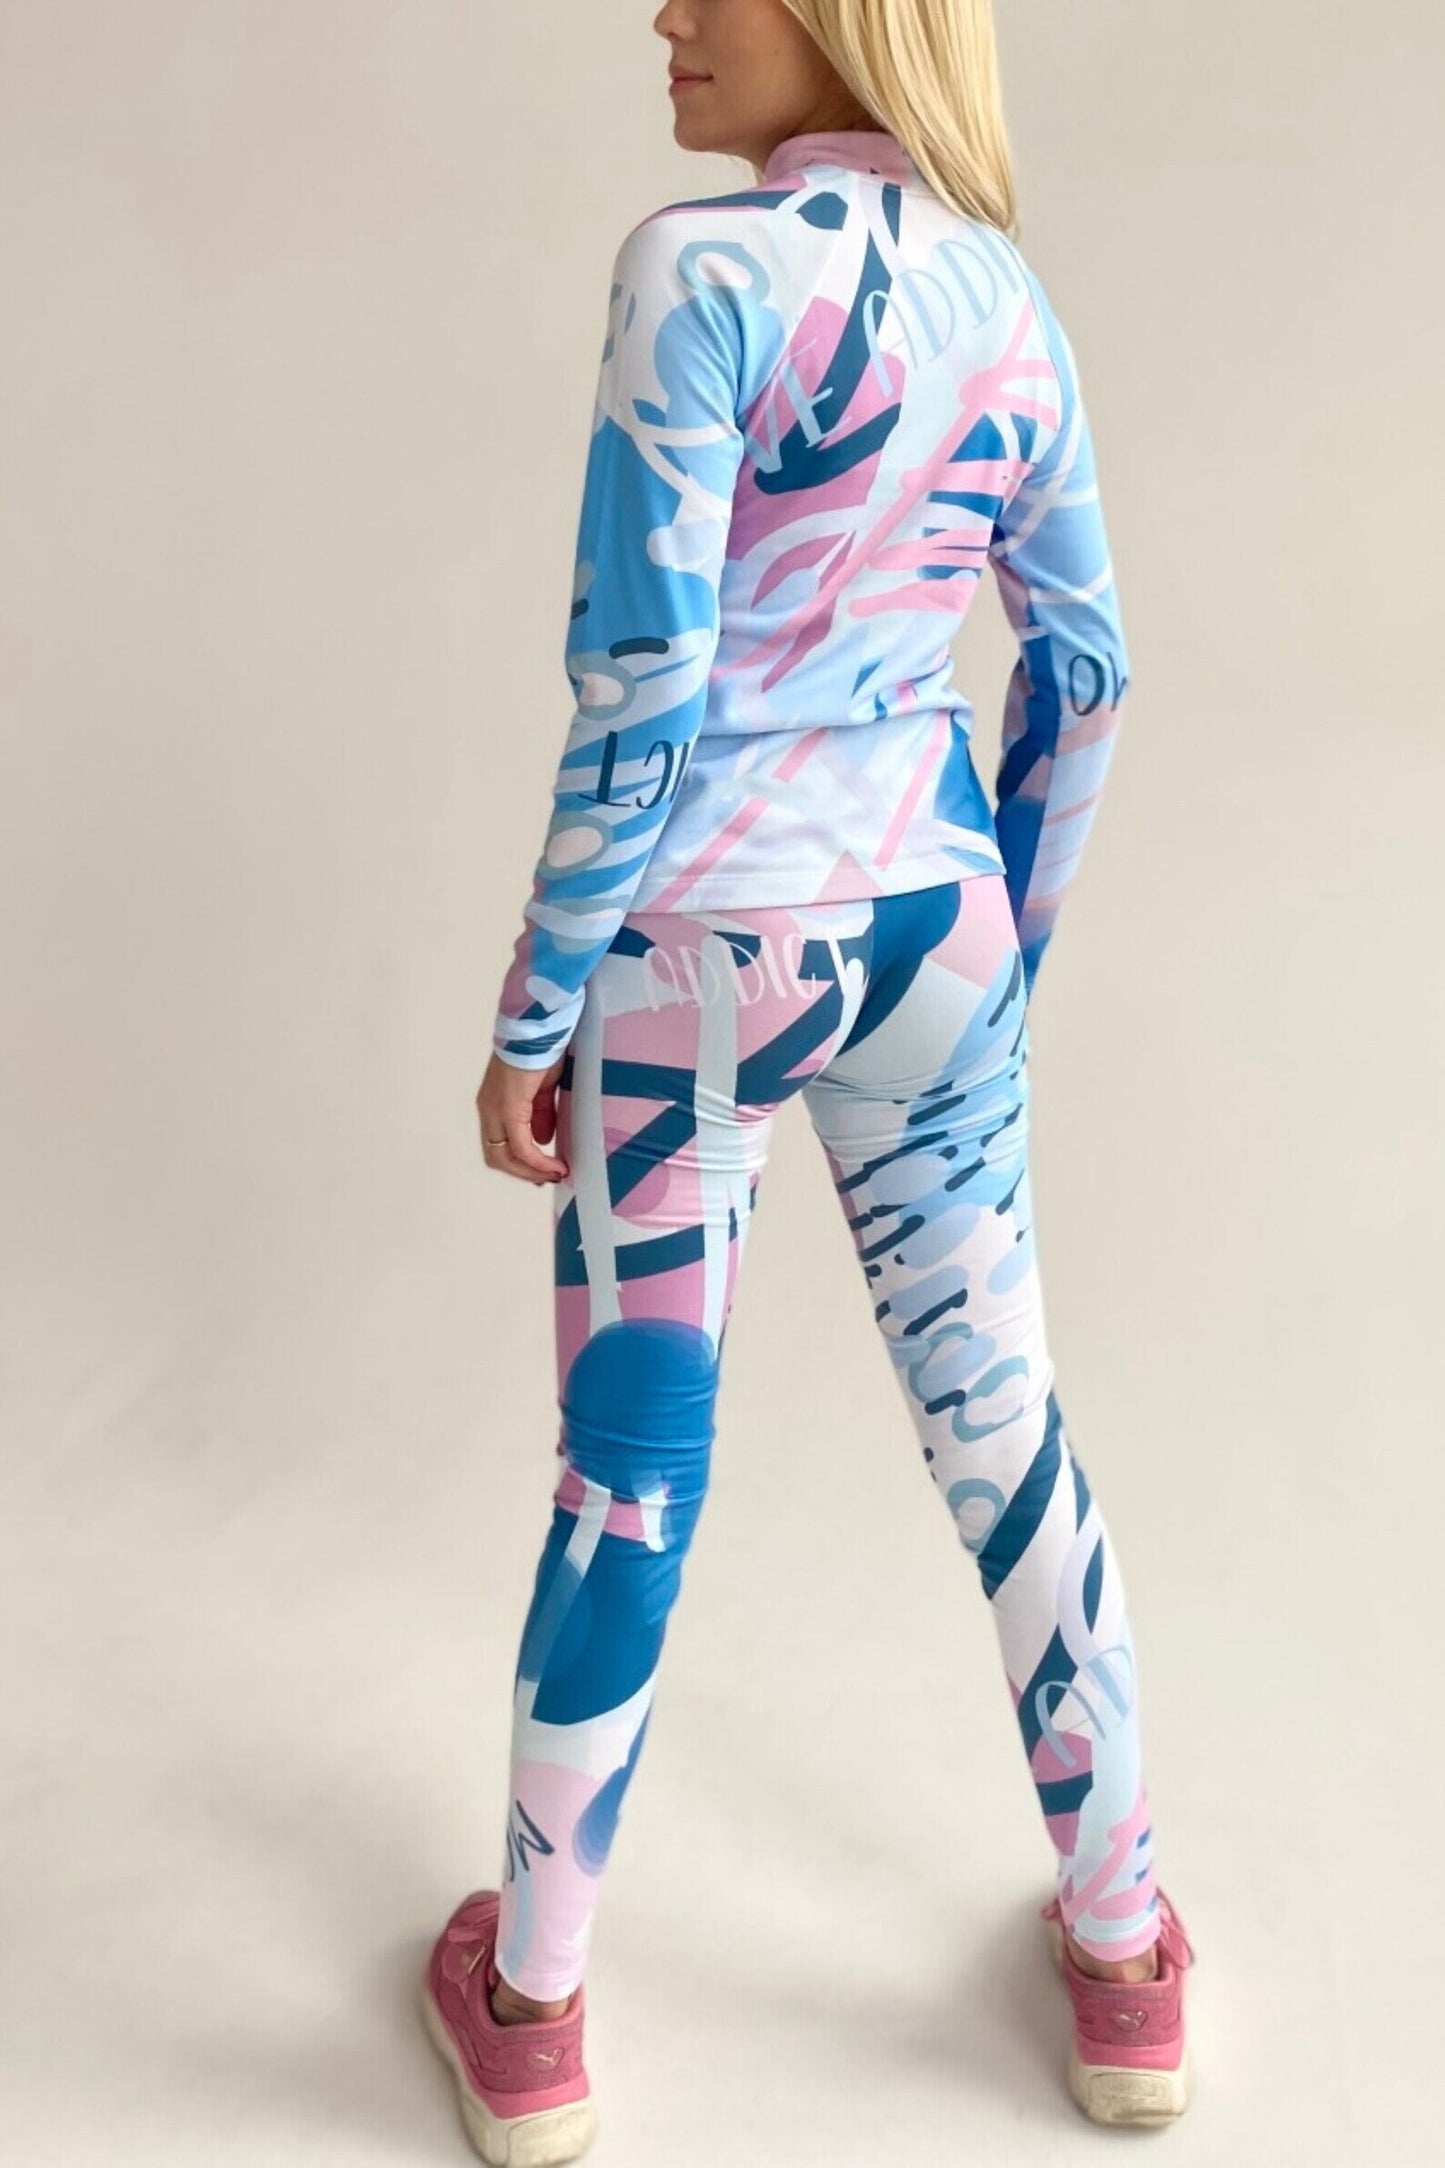 SET: Women's Thermowear, Leggings, Abstract Pink Top, Winter Underwear, Thermal Protective, Clothing, Sport underwear, Winter Clothes